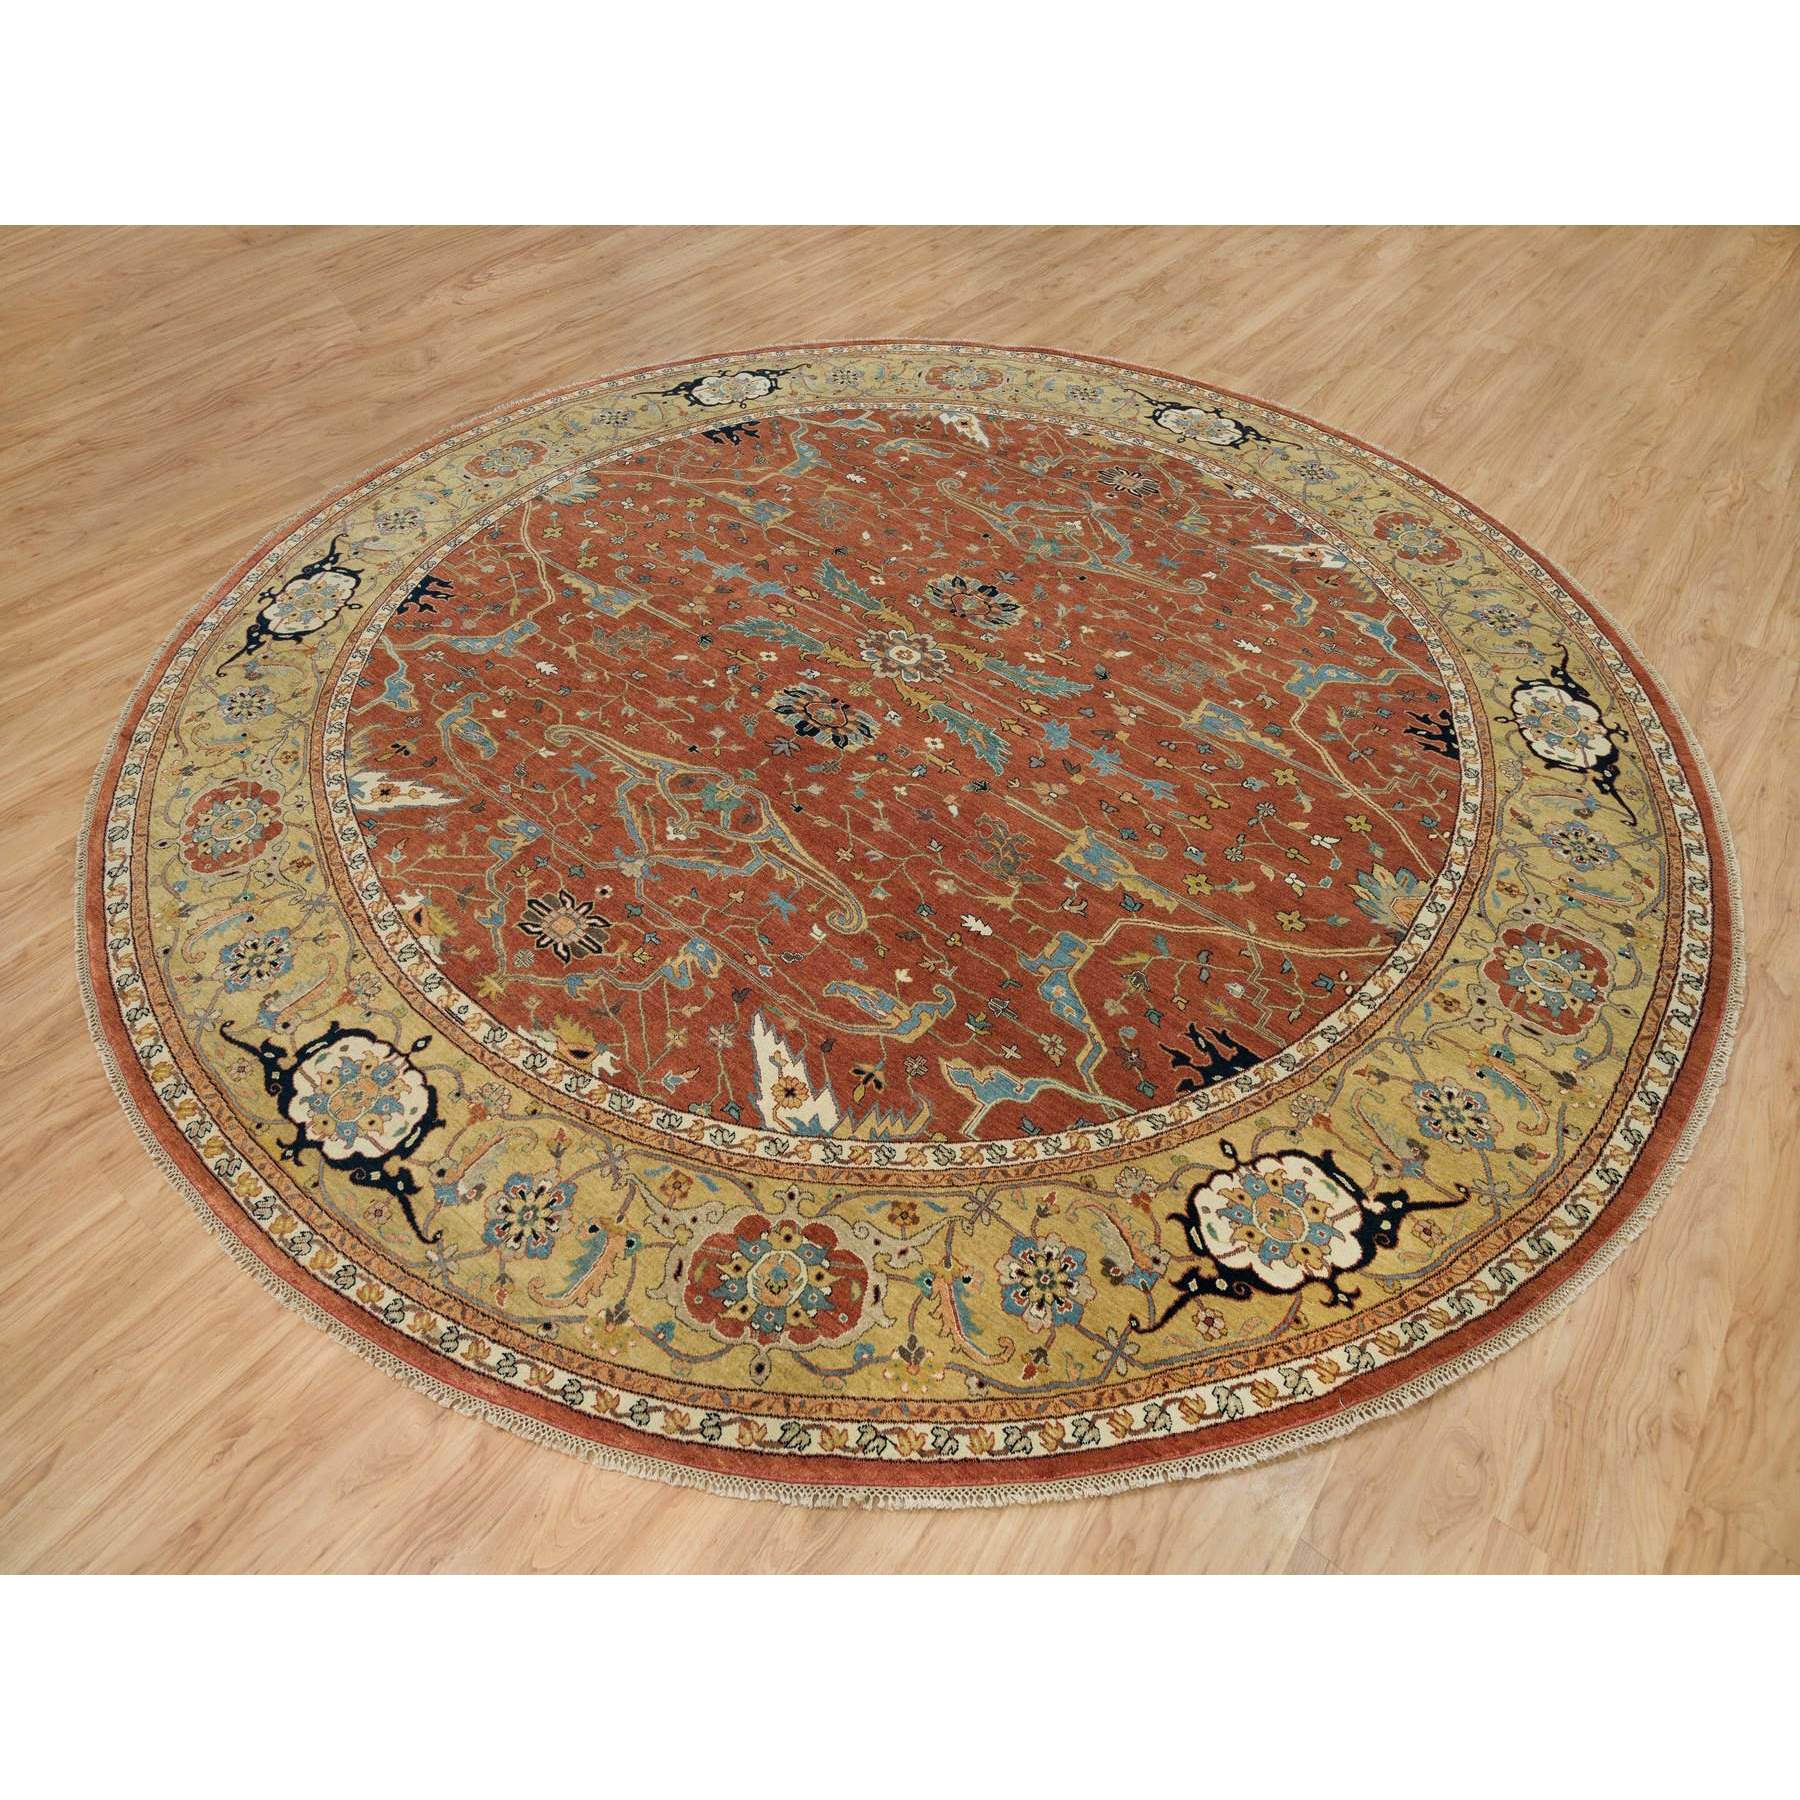 12'x12' Blush Red, Soft Pile, Natural Dyes, Antiqued Fine Heriz Re-Creation, Densely Woven, Extra Soft Wool, Hand Woven, Round Oriental Rug 